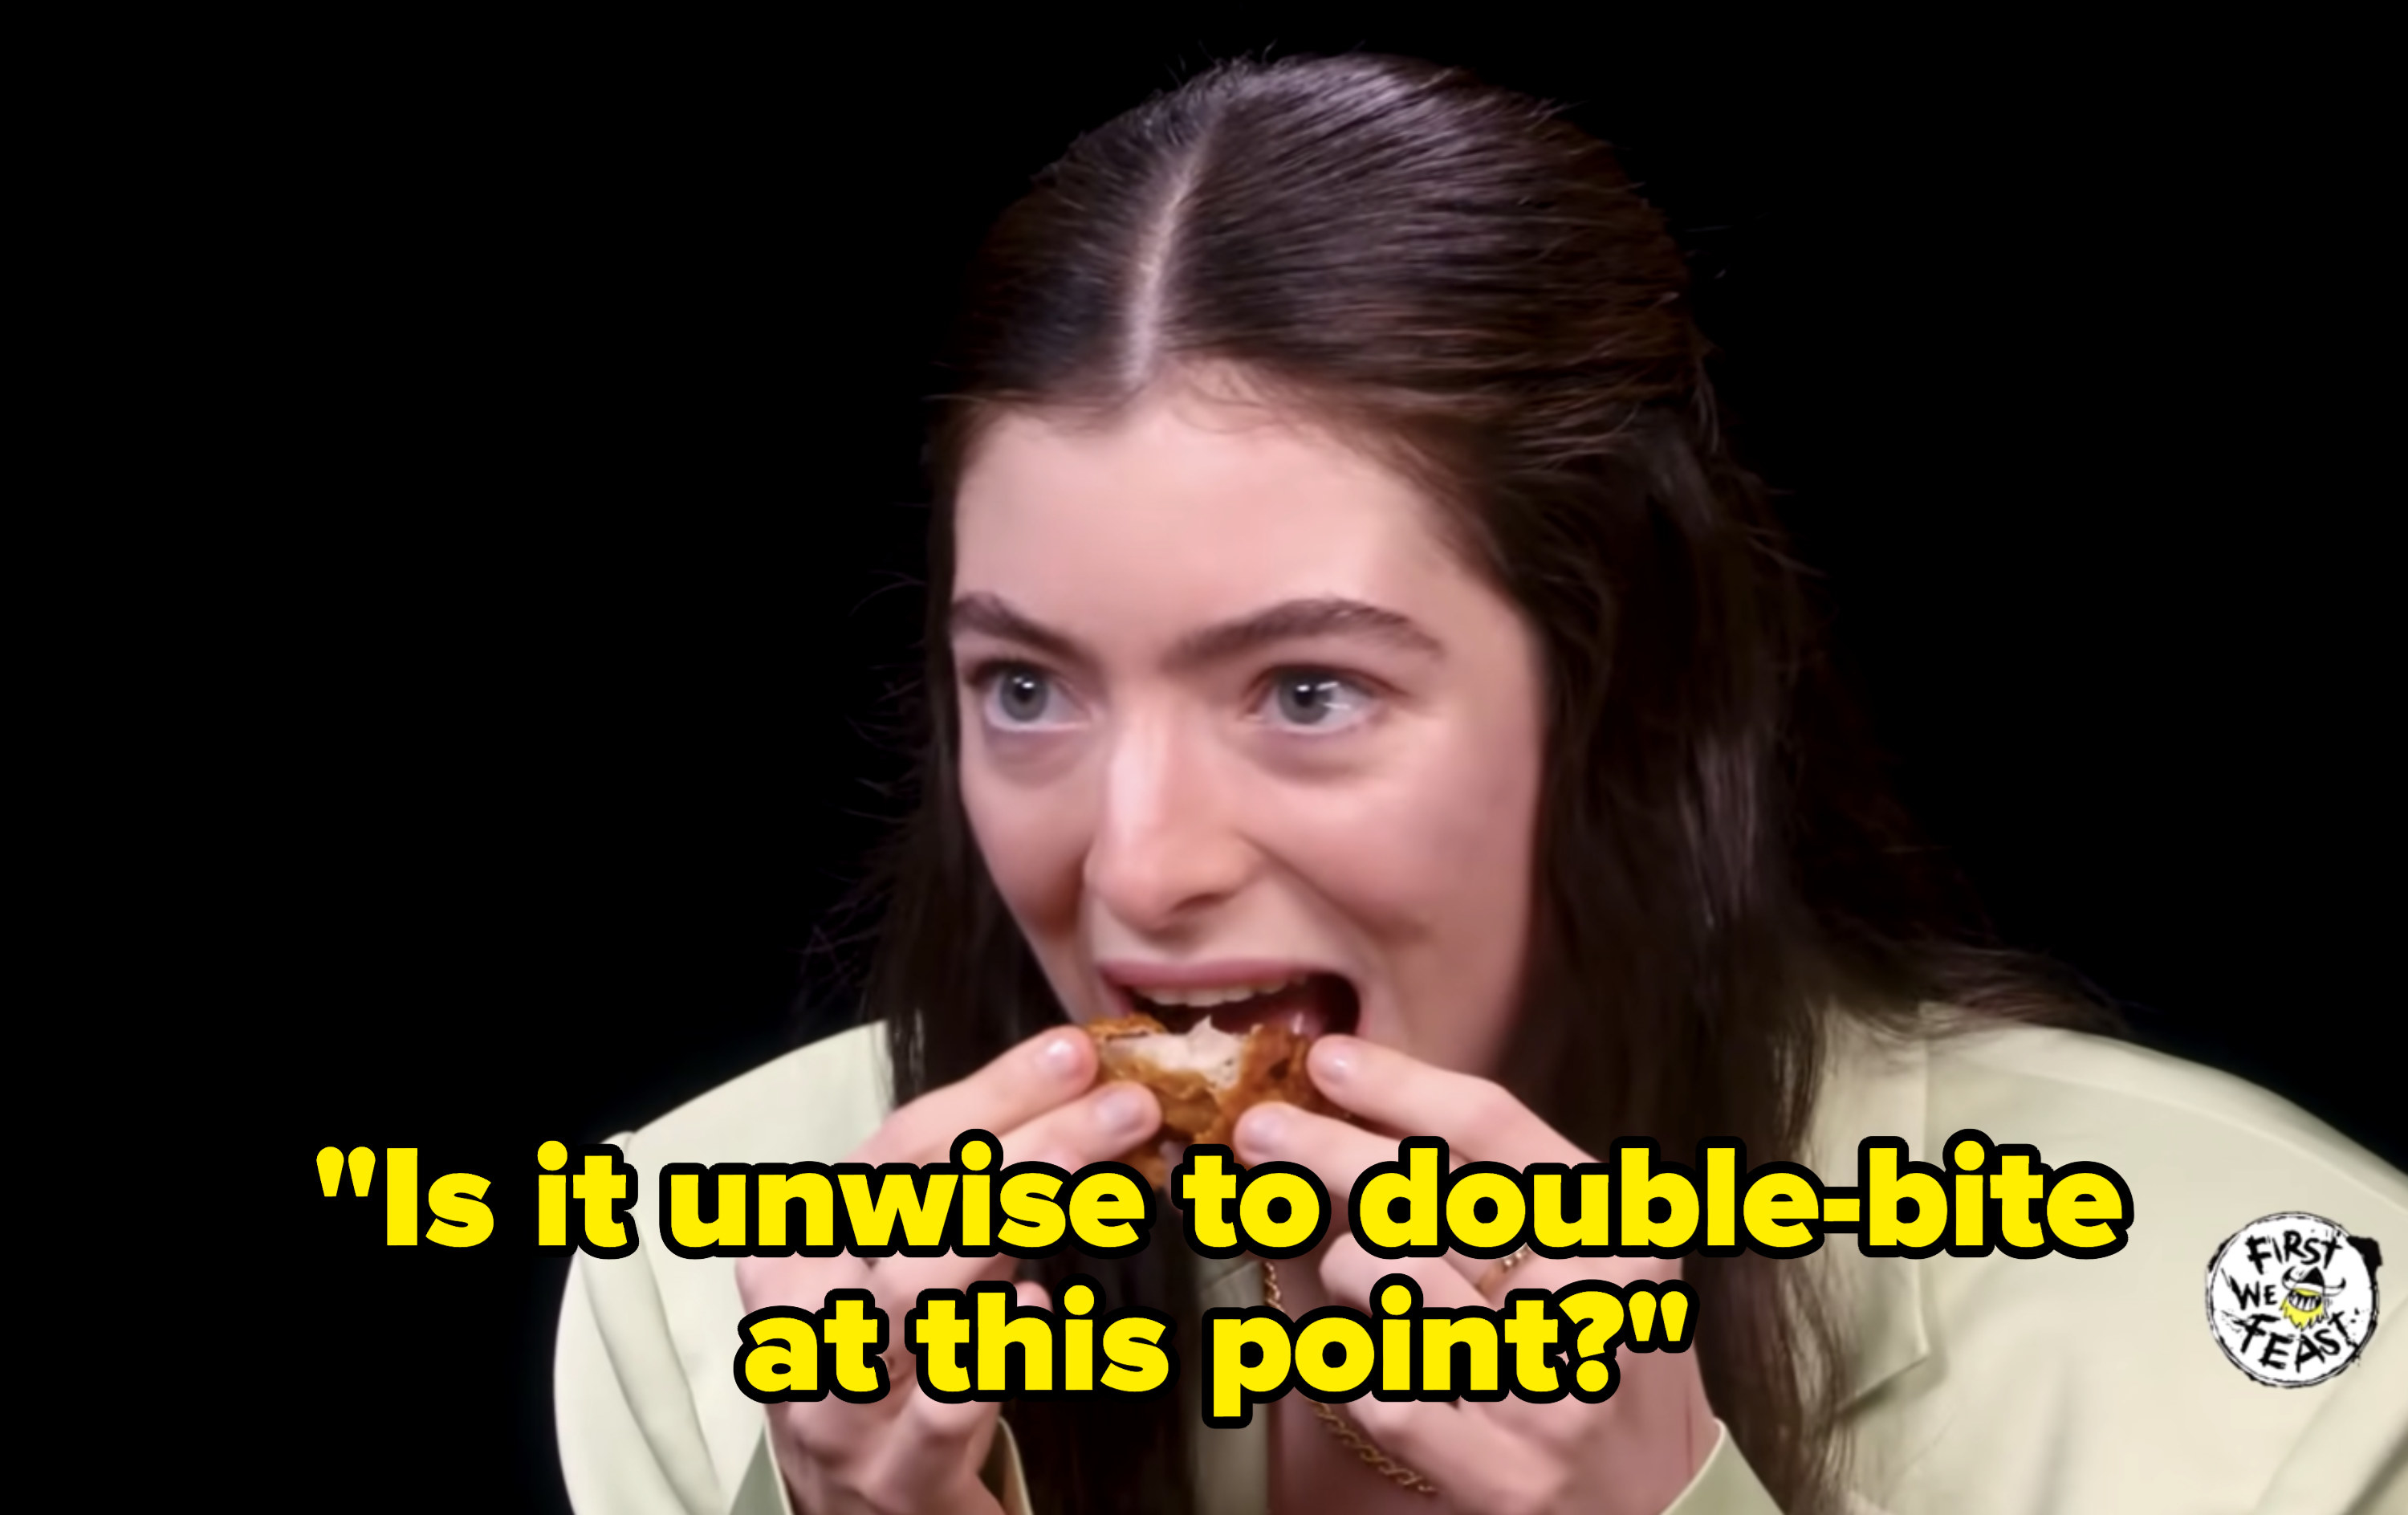 Lorde biting into her wing again and asking, &quot;is it unwise to double bite at this point?&quot;